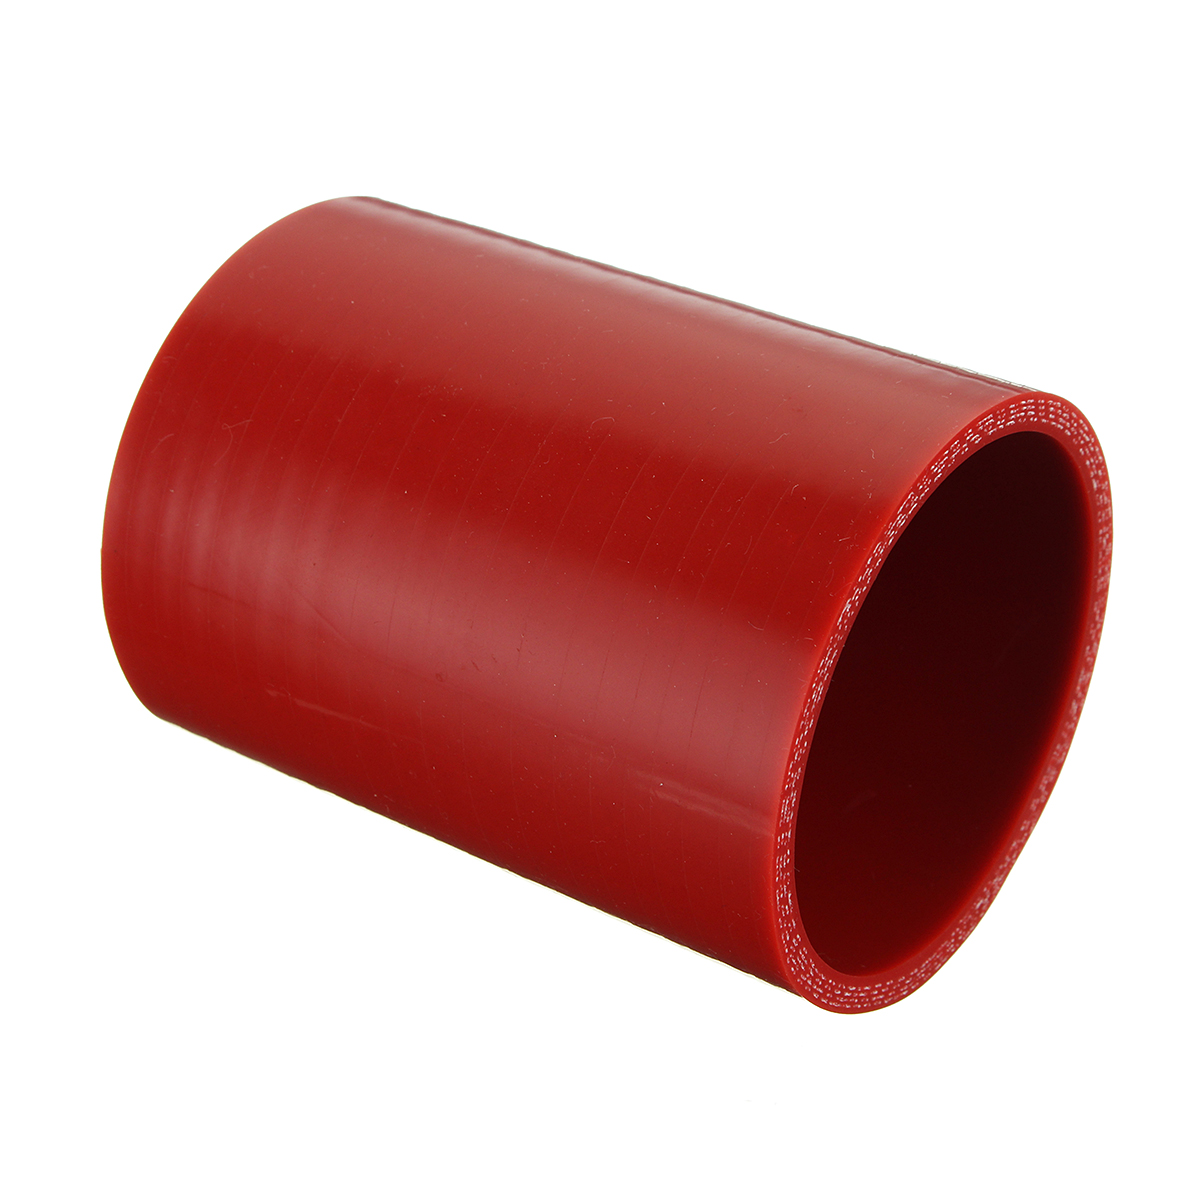 100mm-Straight-Silicone-Hose-Coupling-Connector-Silicon-Rubber-Tube-Joiner-Pipe-Ash-1619119-4